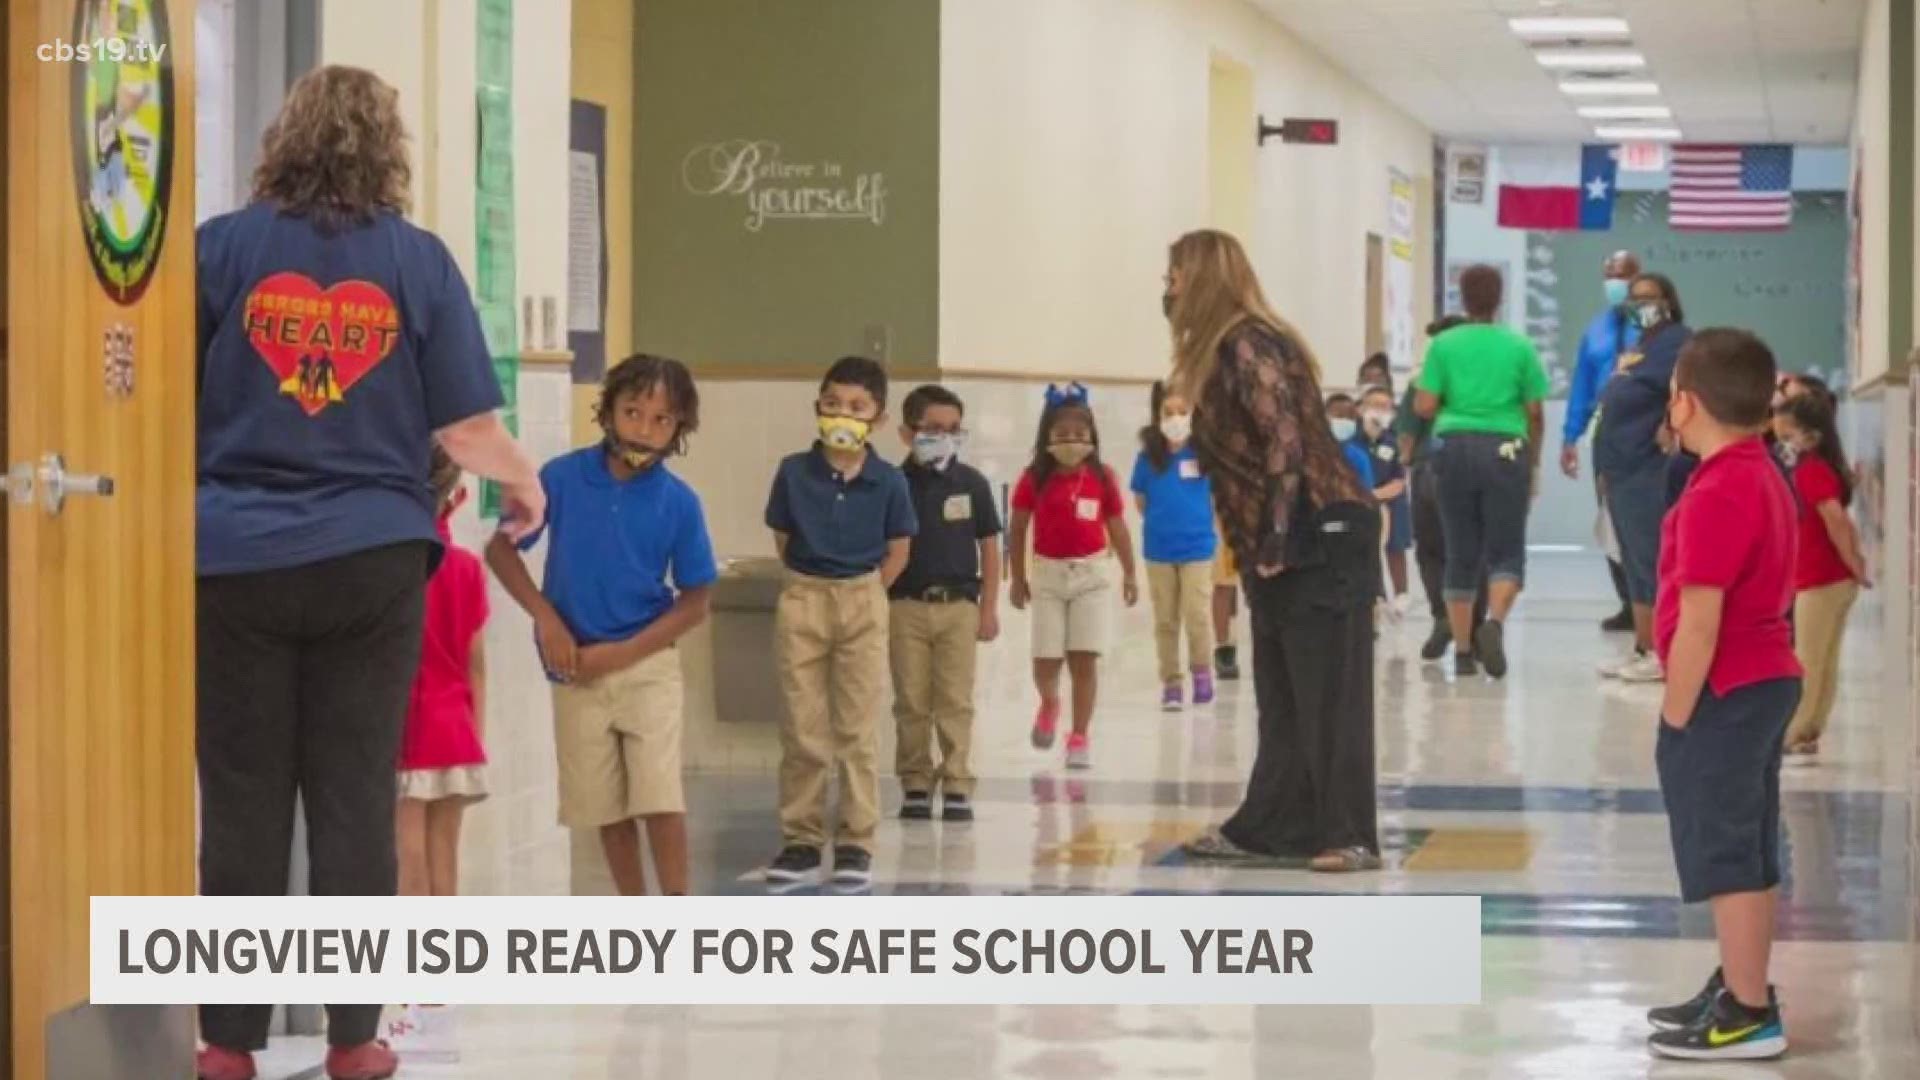 Longview ISD is ready to tackle the new school year mid a pandemic. The district is enforcing masks, social distancing and has added hand washing stations.